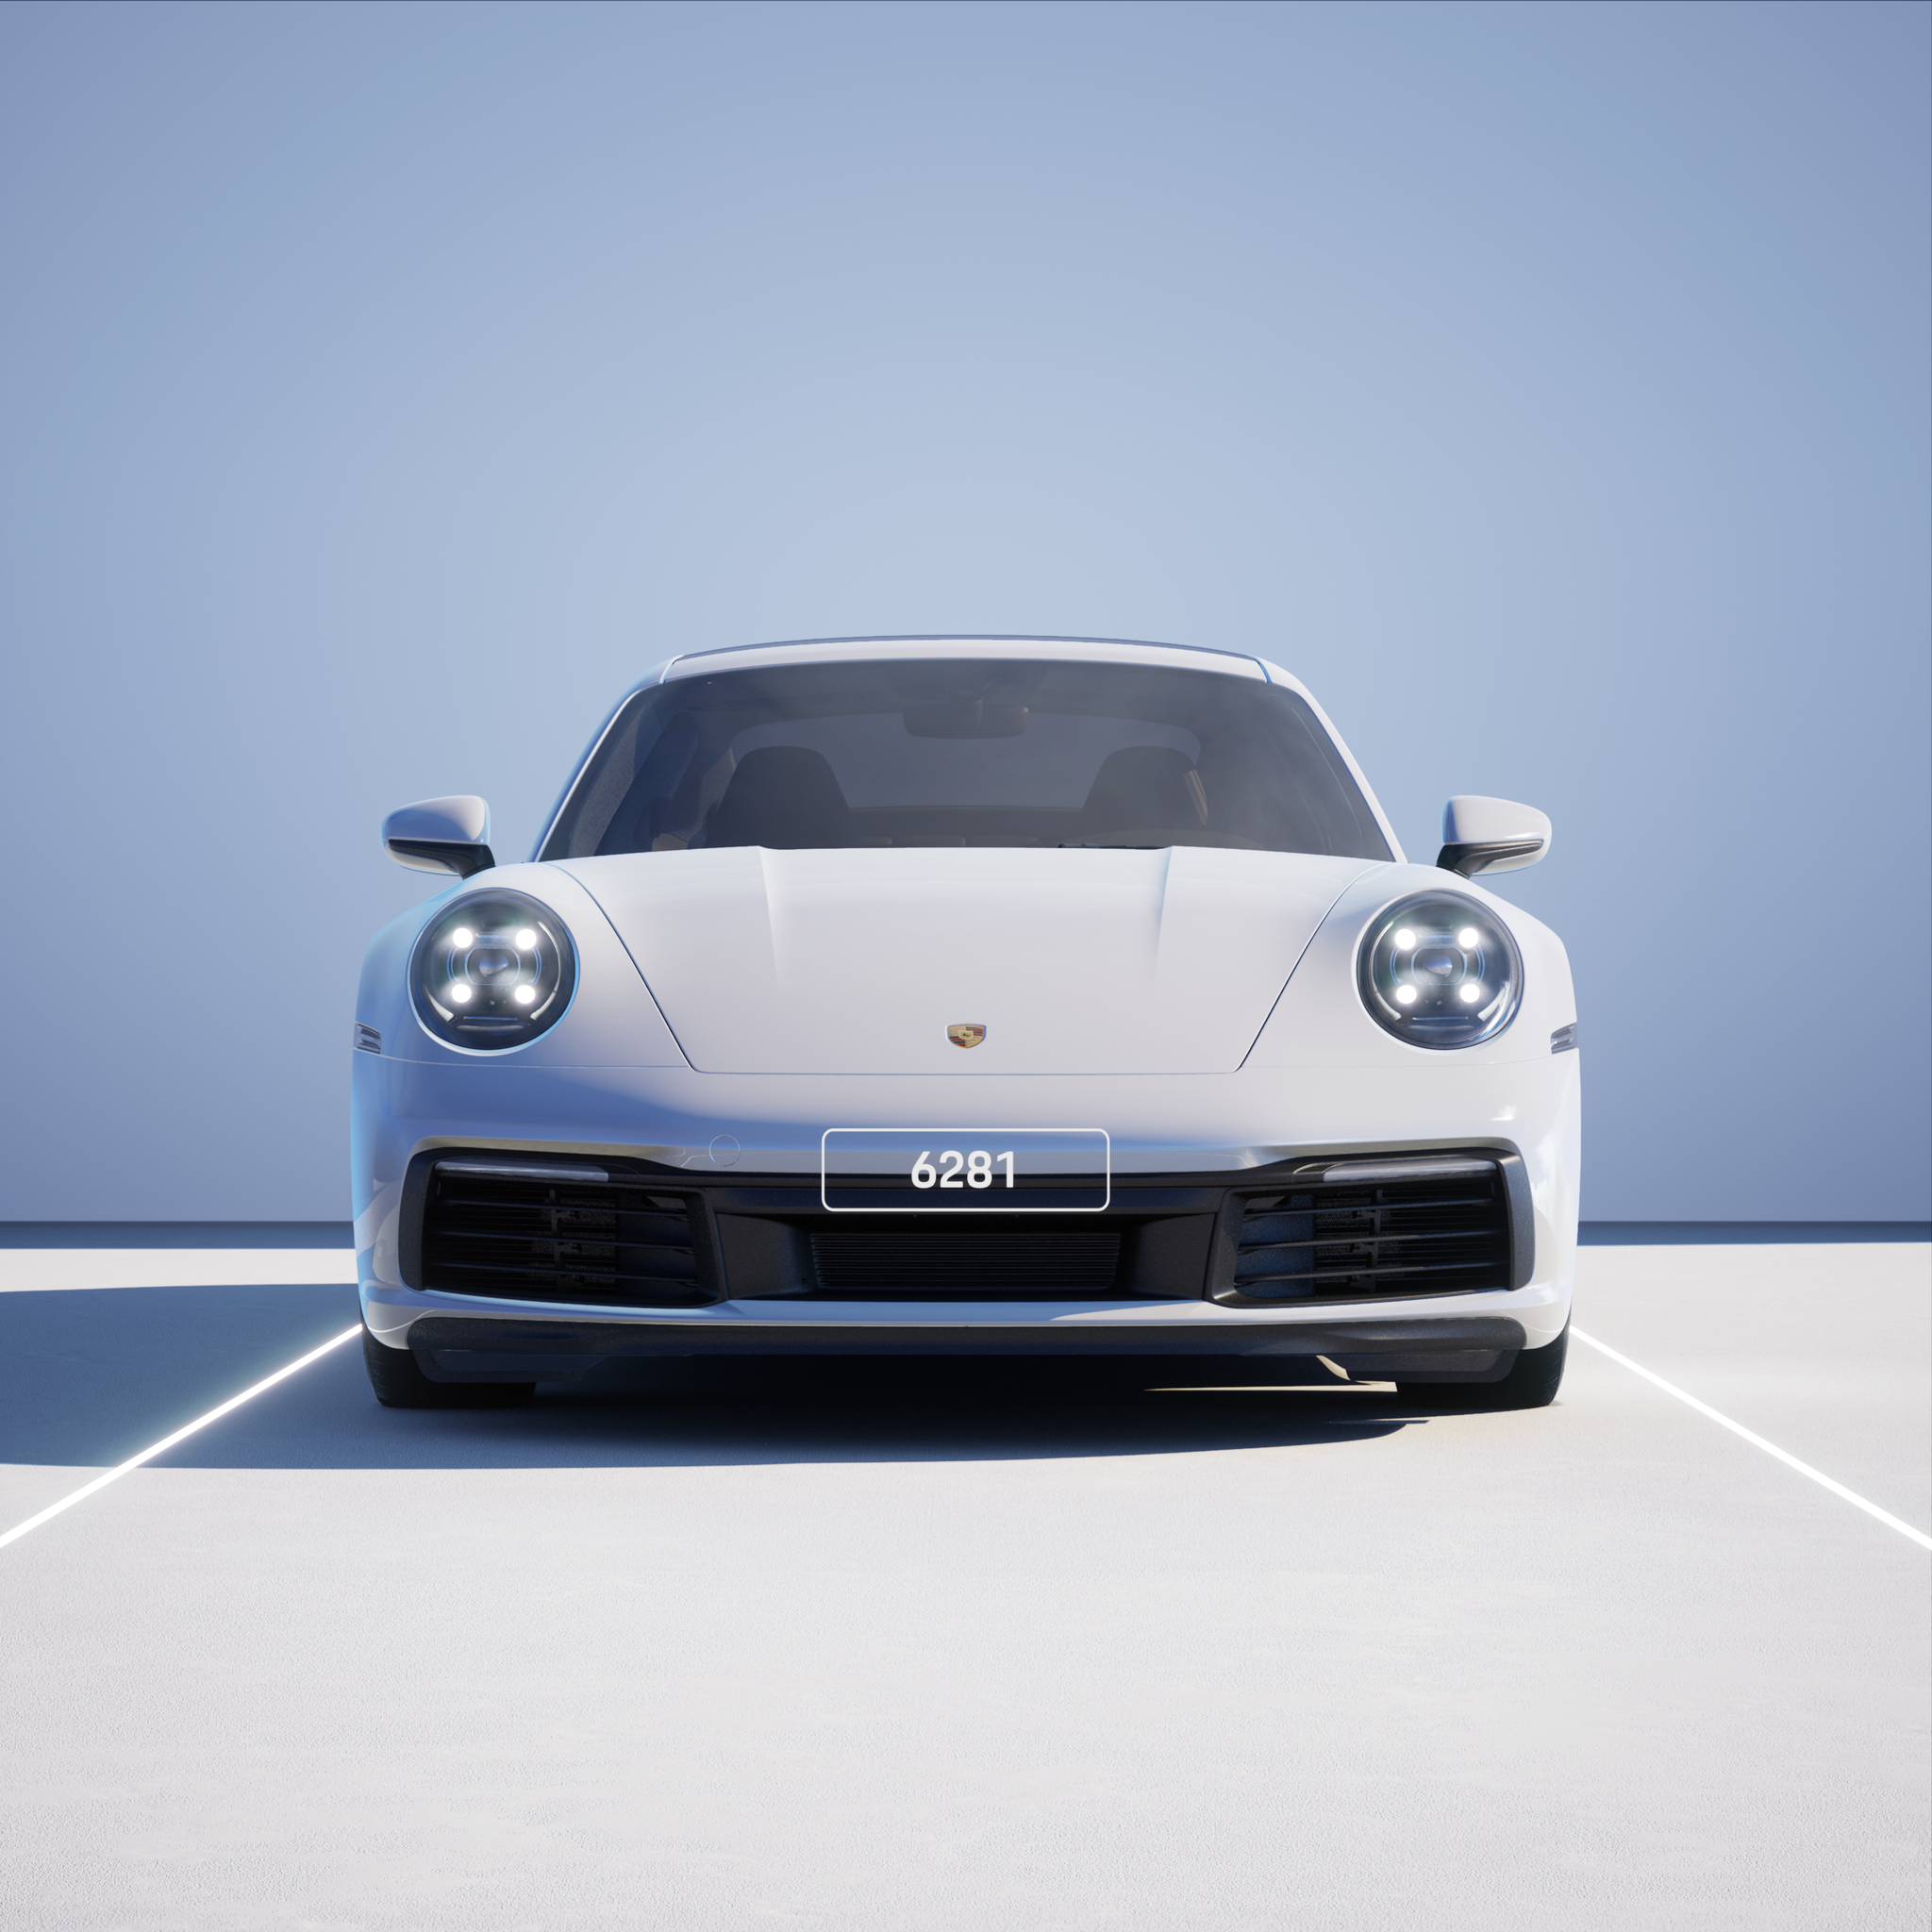 The PORSCHΞ 911 6281 image in phase